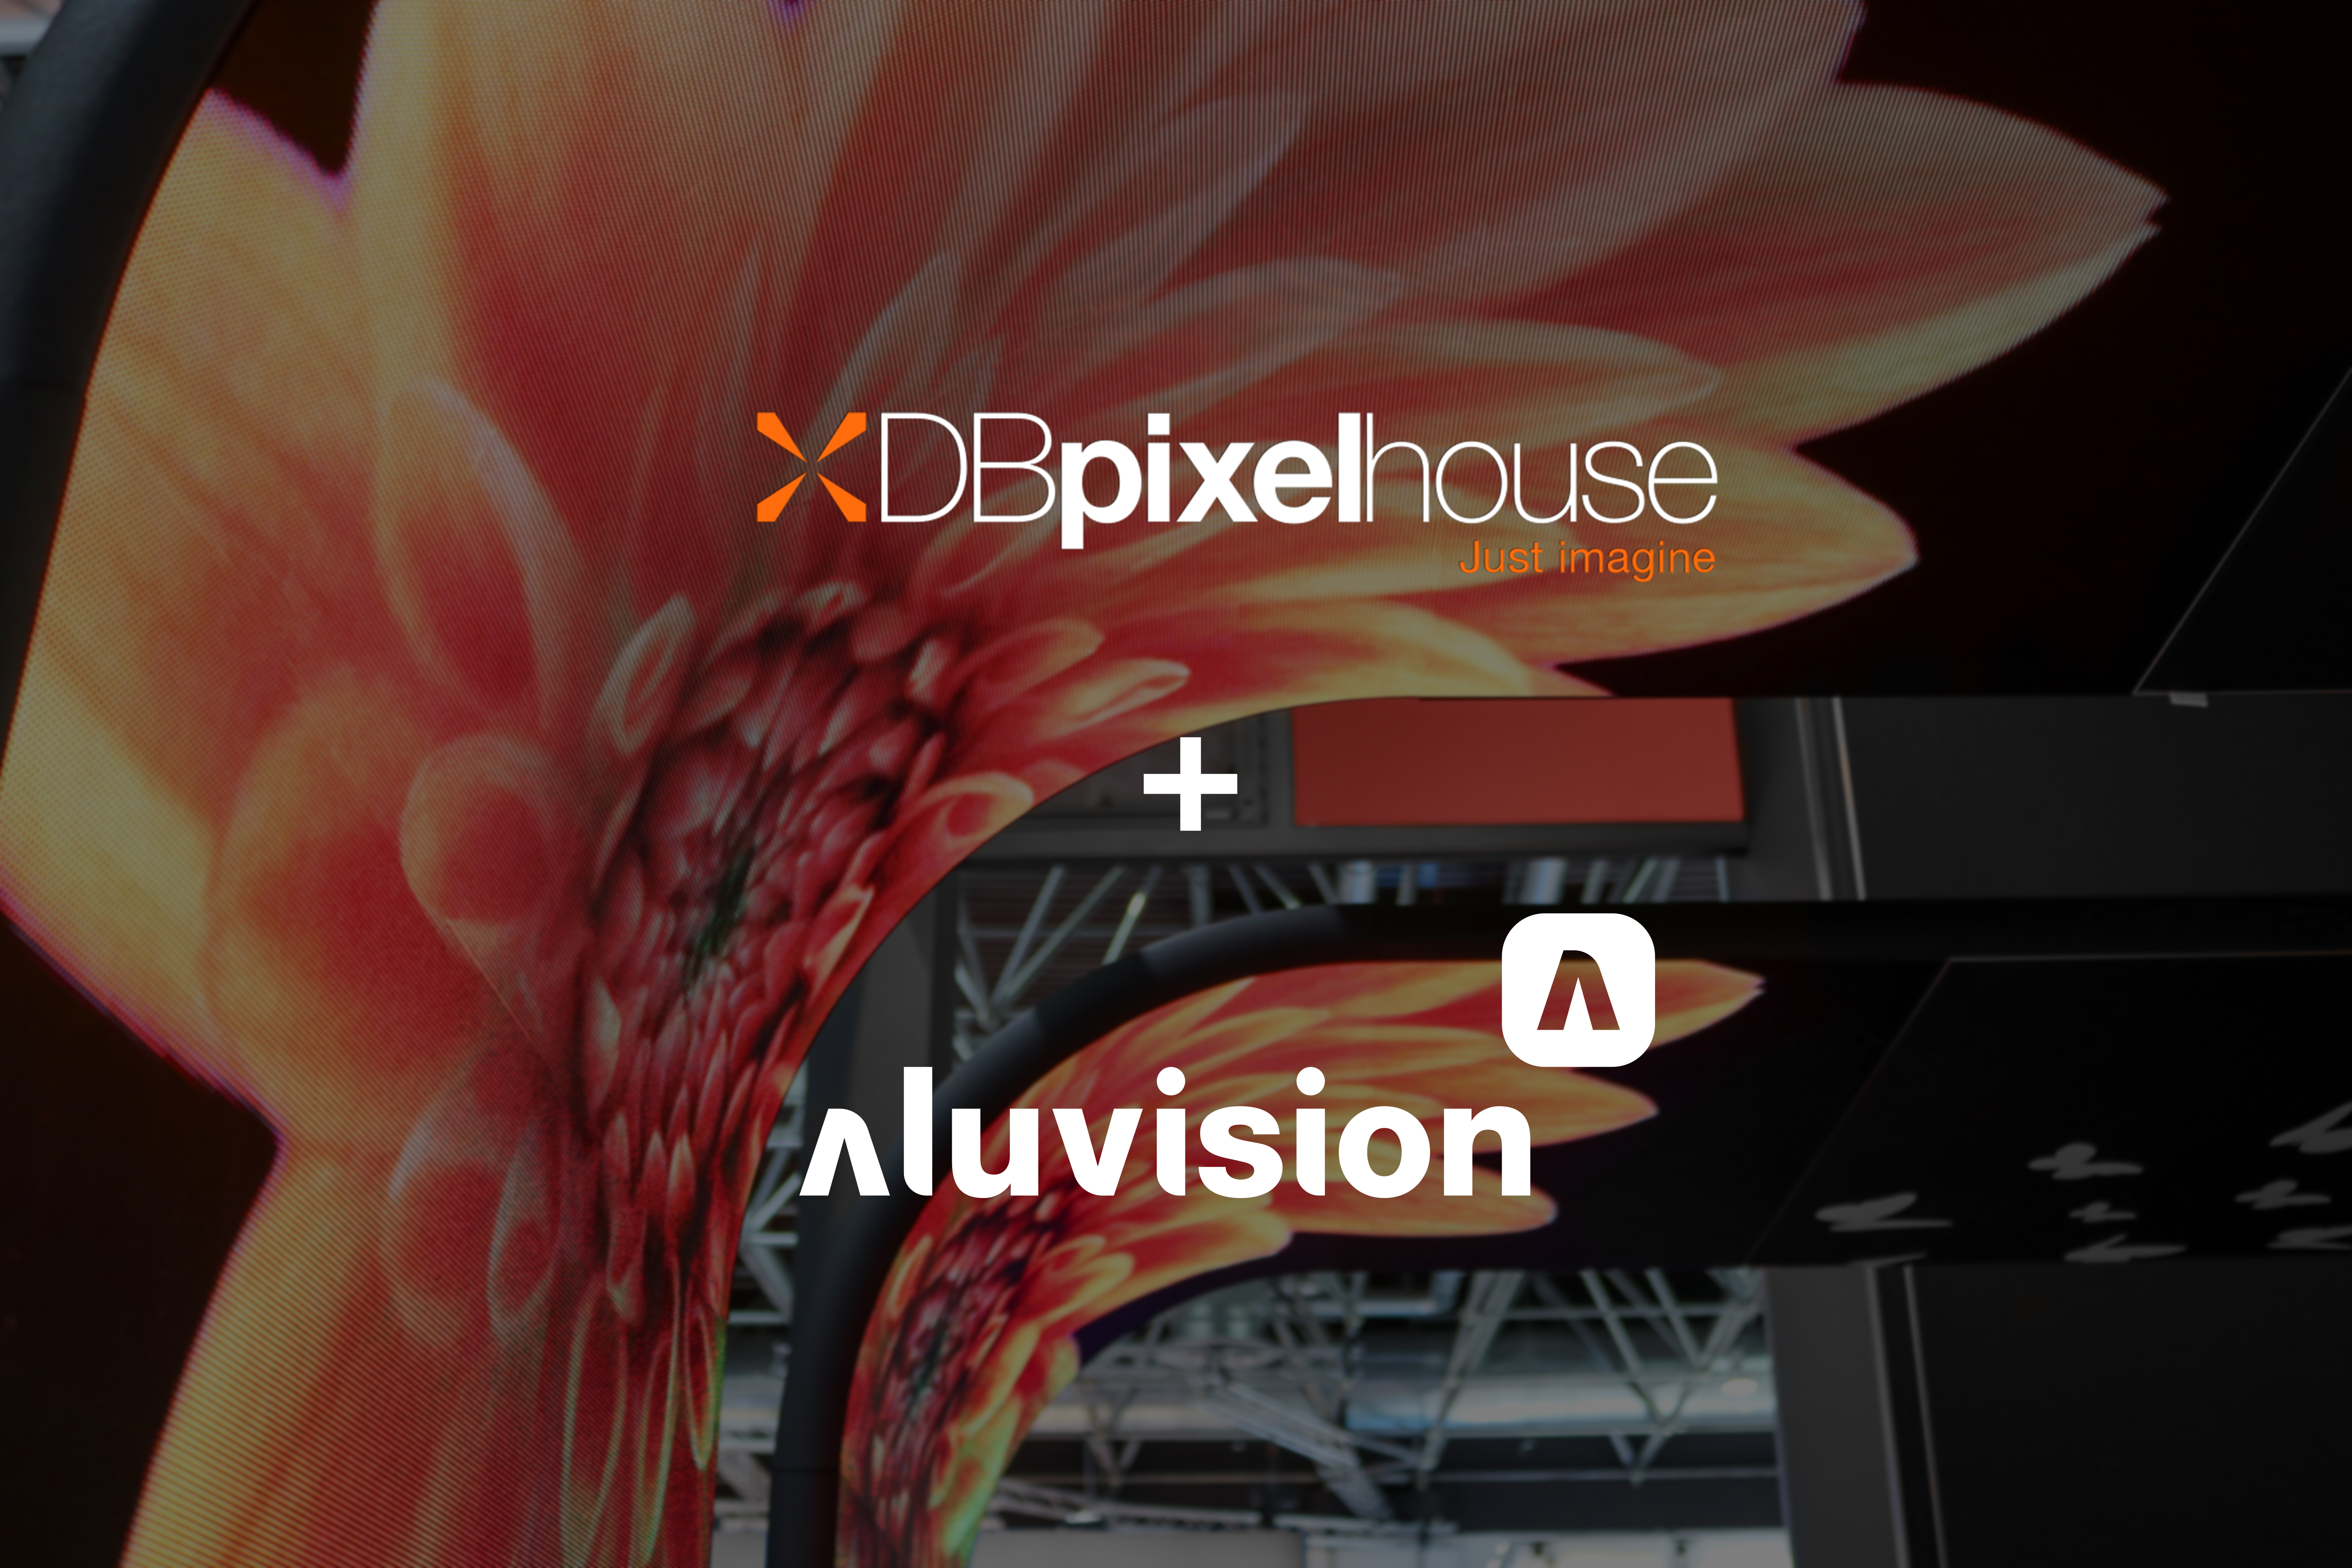 Aluvision x DBpixel house